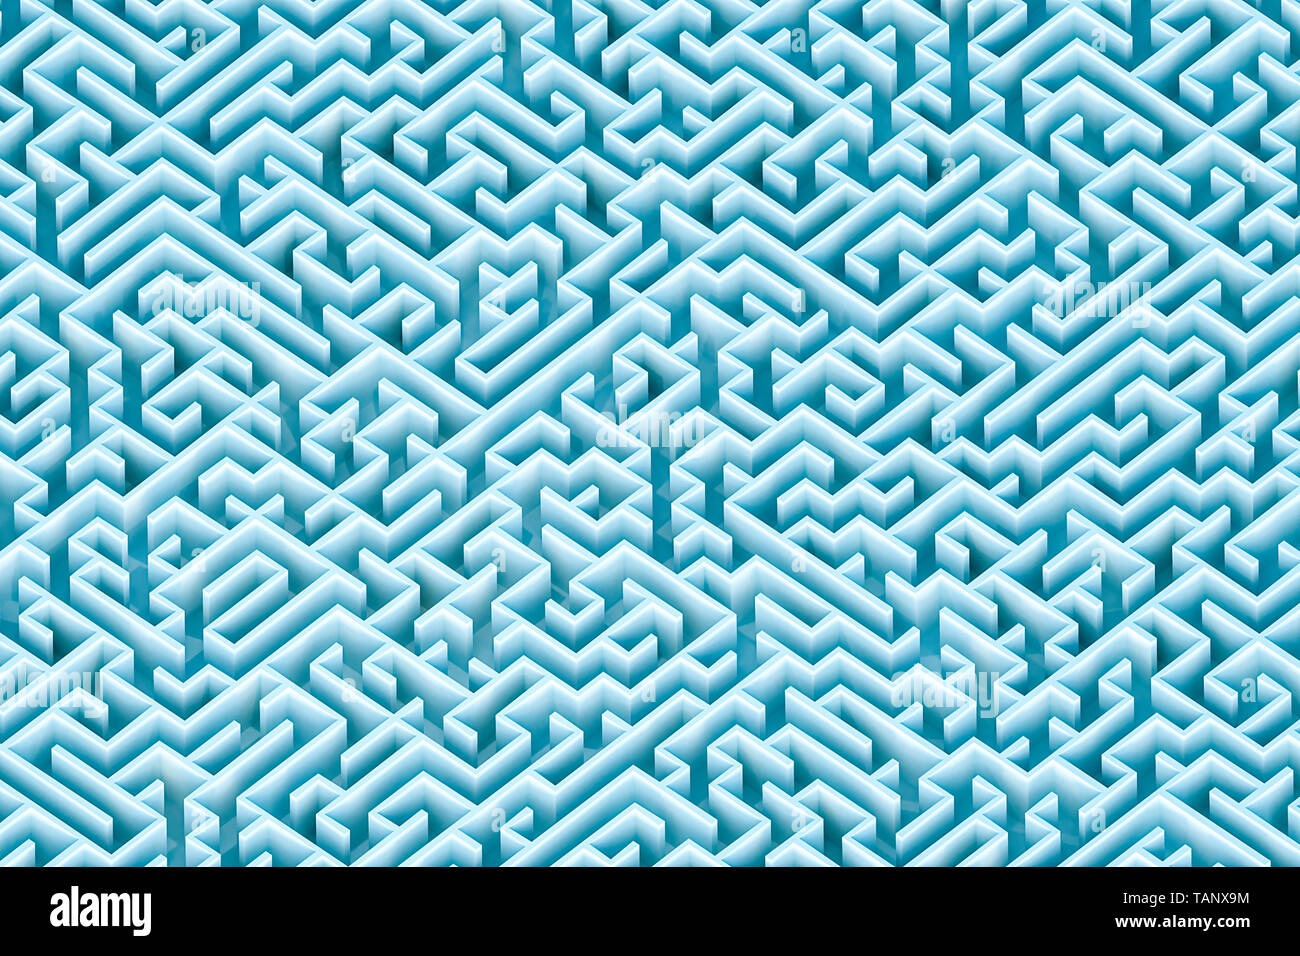 Endless blue green rectangular maze or labyrinth architecture wallpaper, background or backdrop. Aerial view. 3d render illustration. Stock Photo